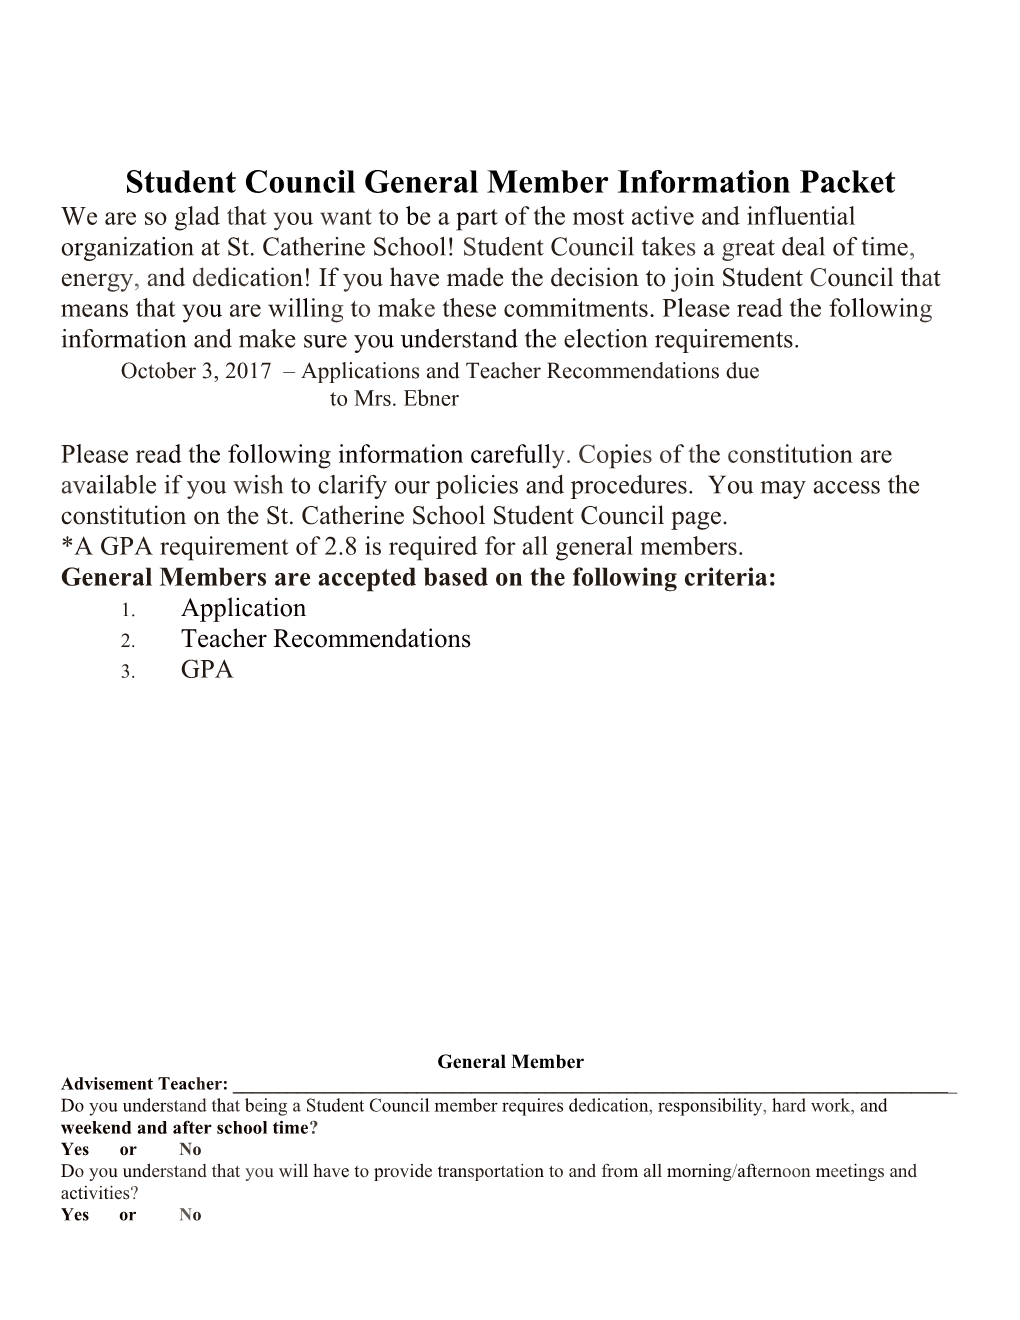 Student Council Election Information Packet